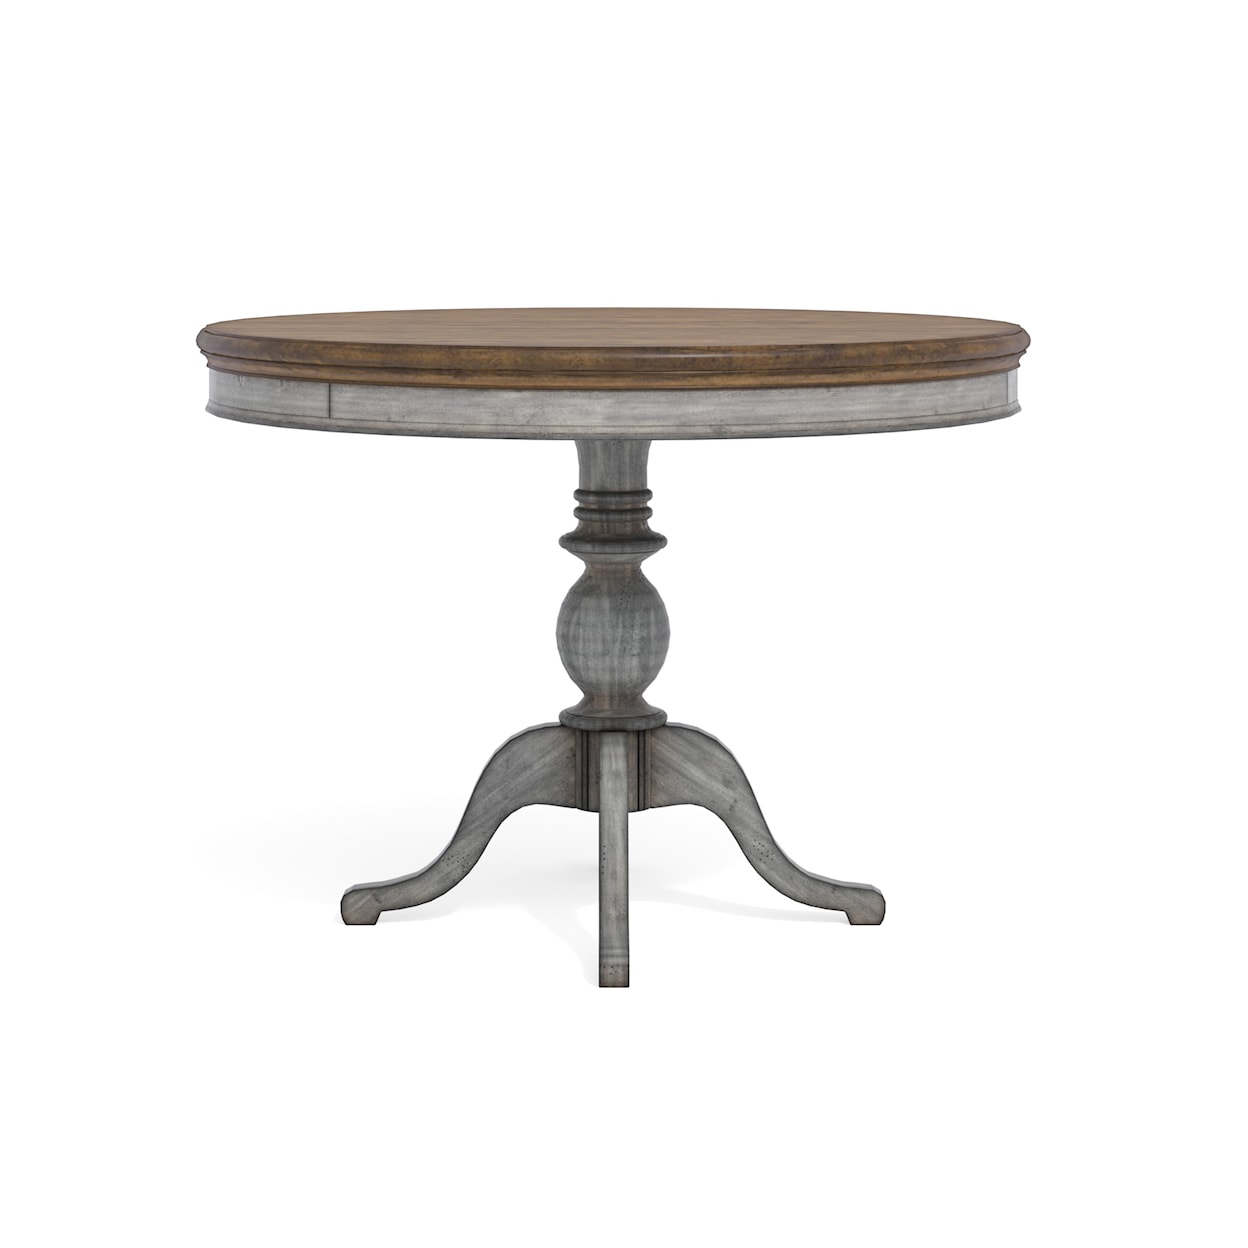 Flexsteel Wynwood Collection Plymouth Counter Height Pedestal Table